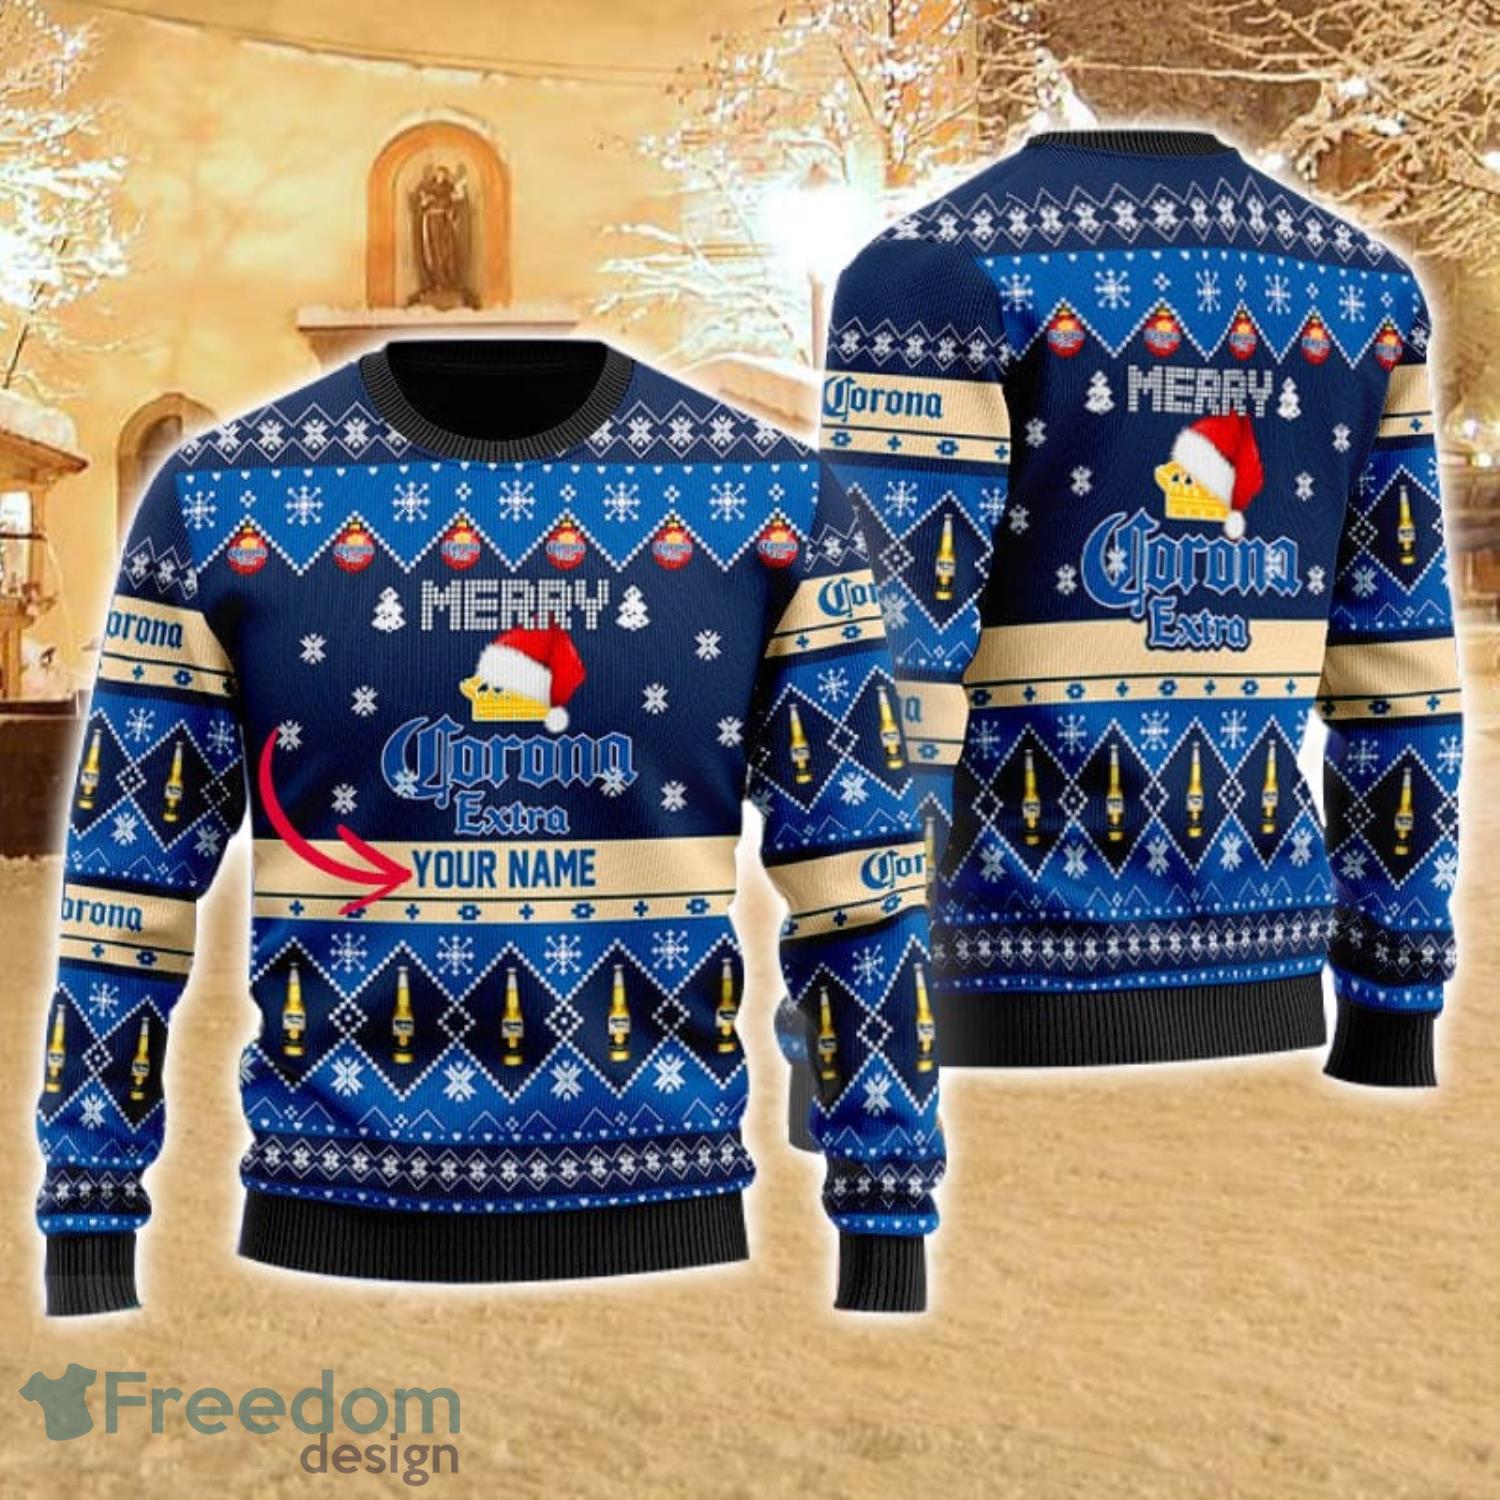 https://image.freedomdesignstore.com/2023/10/corona-extra-personalized-name-and-number-ugly-christmas-sweater-christmas-holiday-gift.jpg